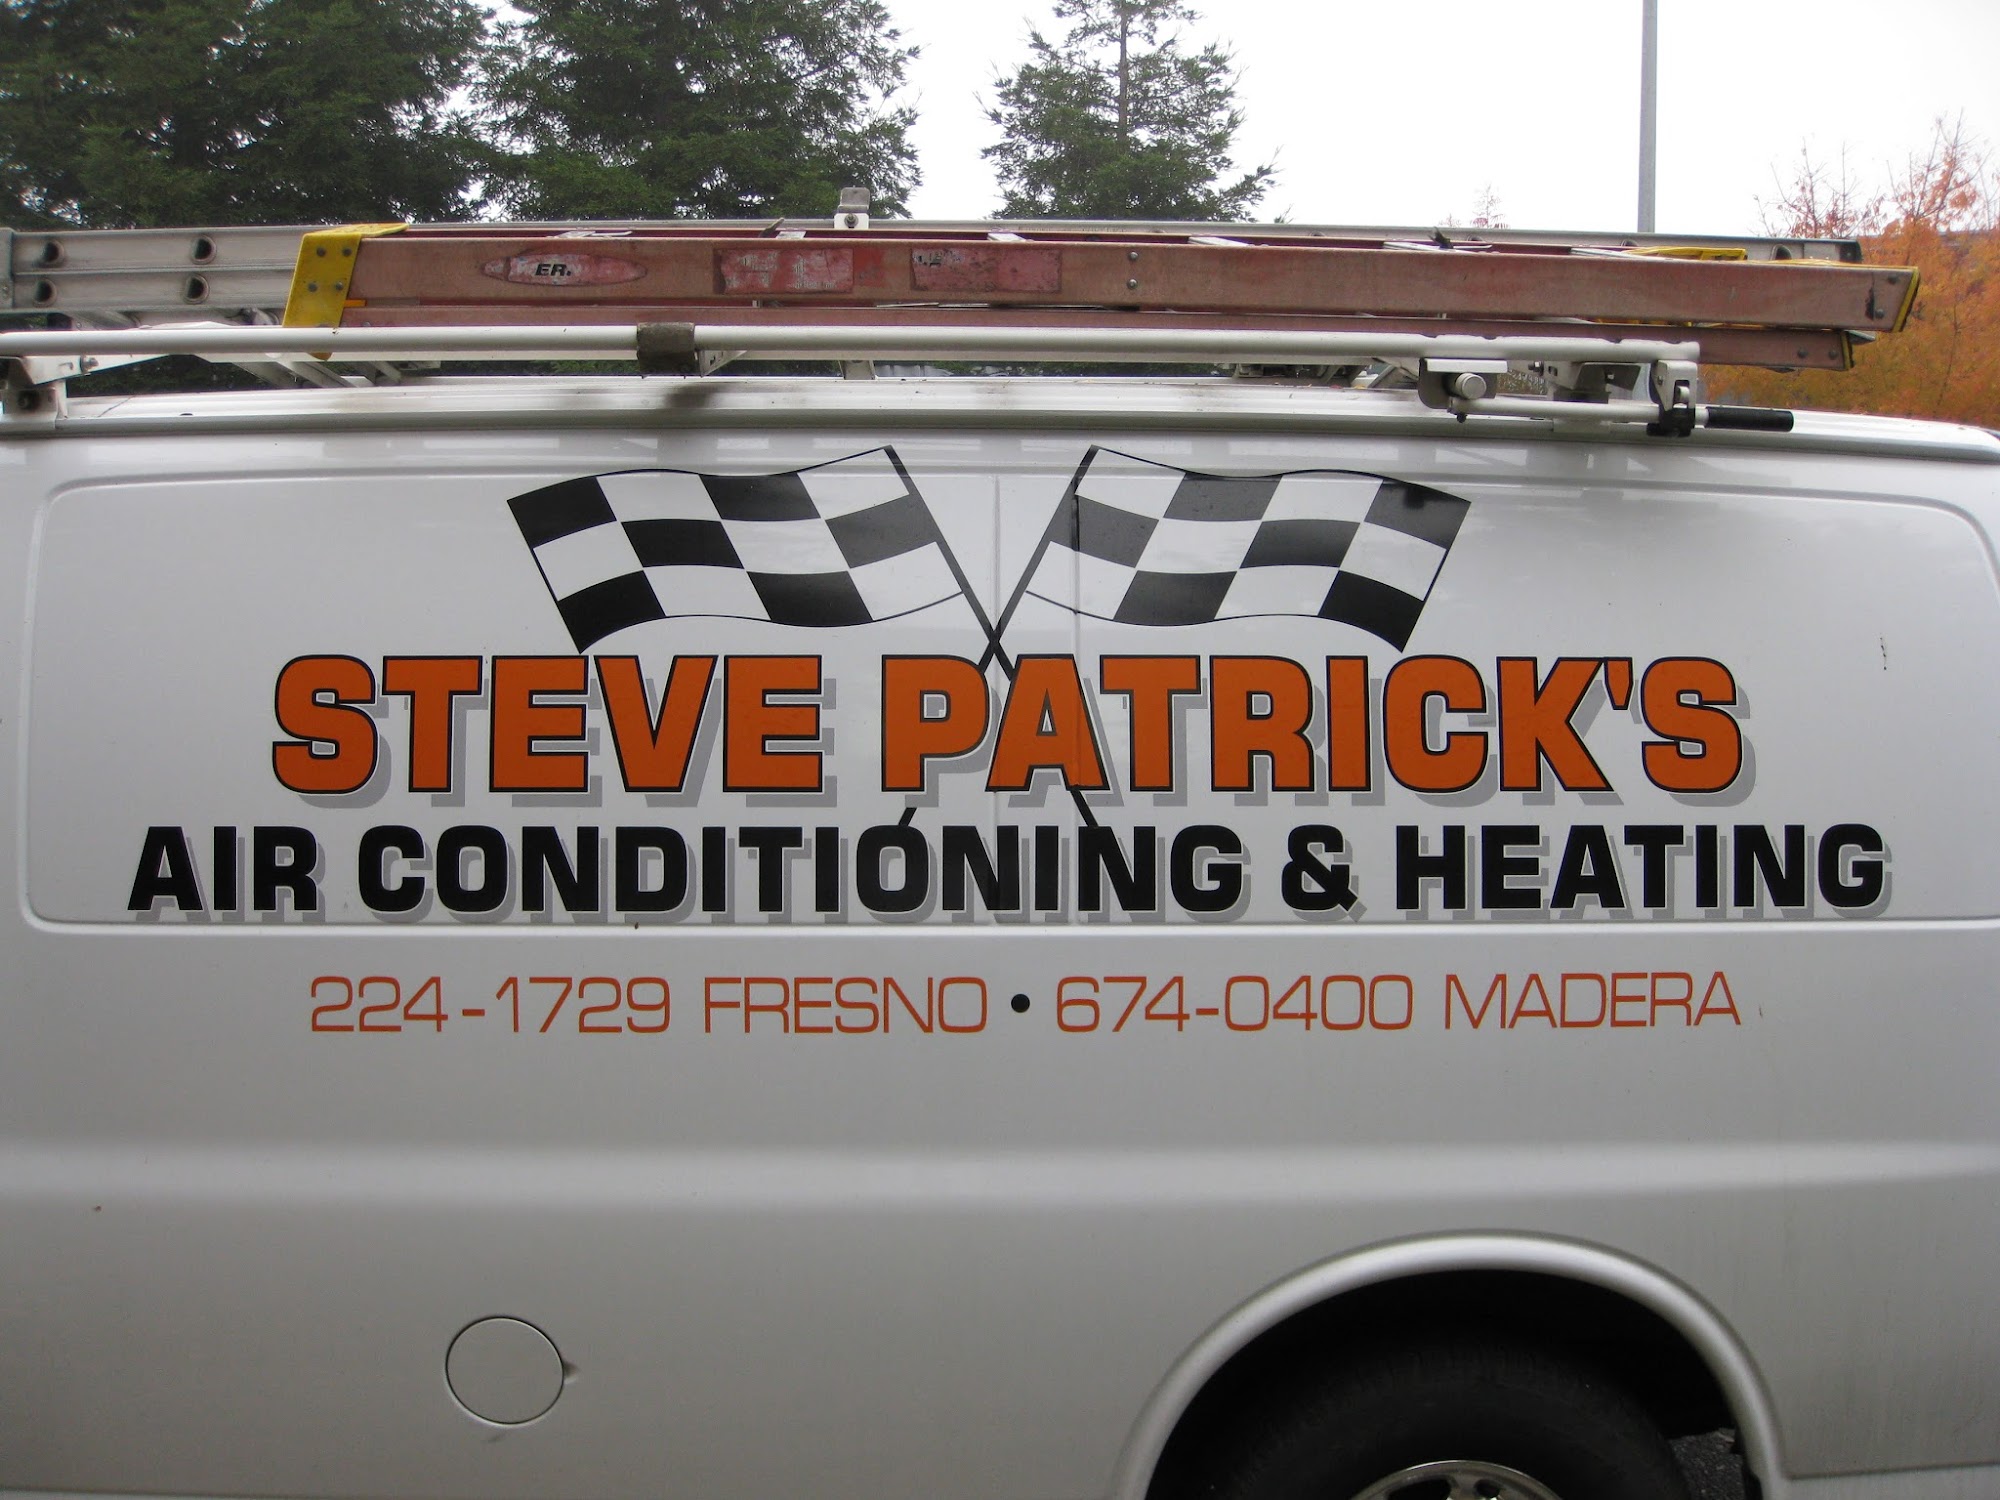 Steve Patrick Air Conditioning & Heating